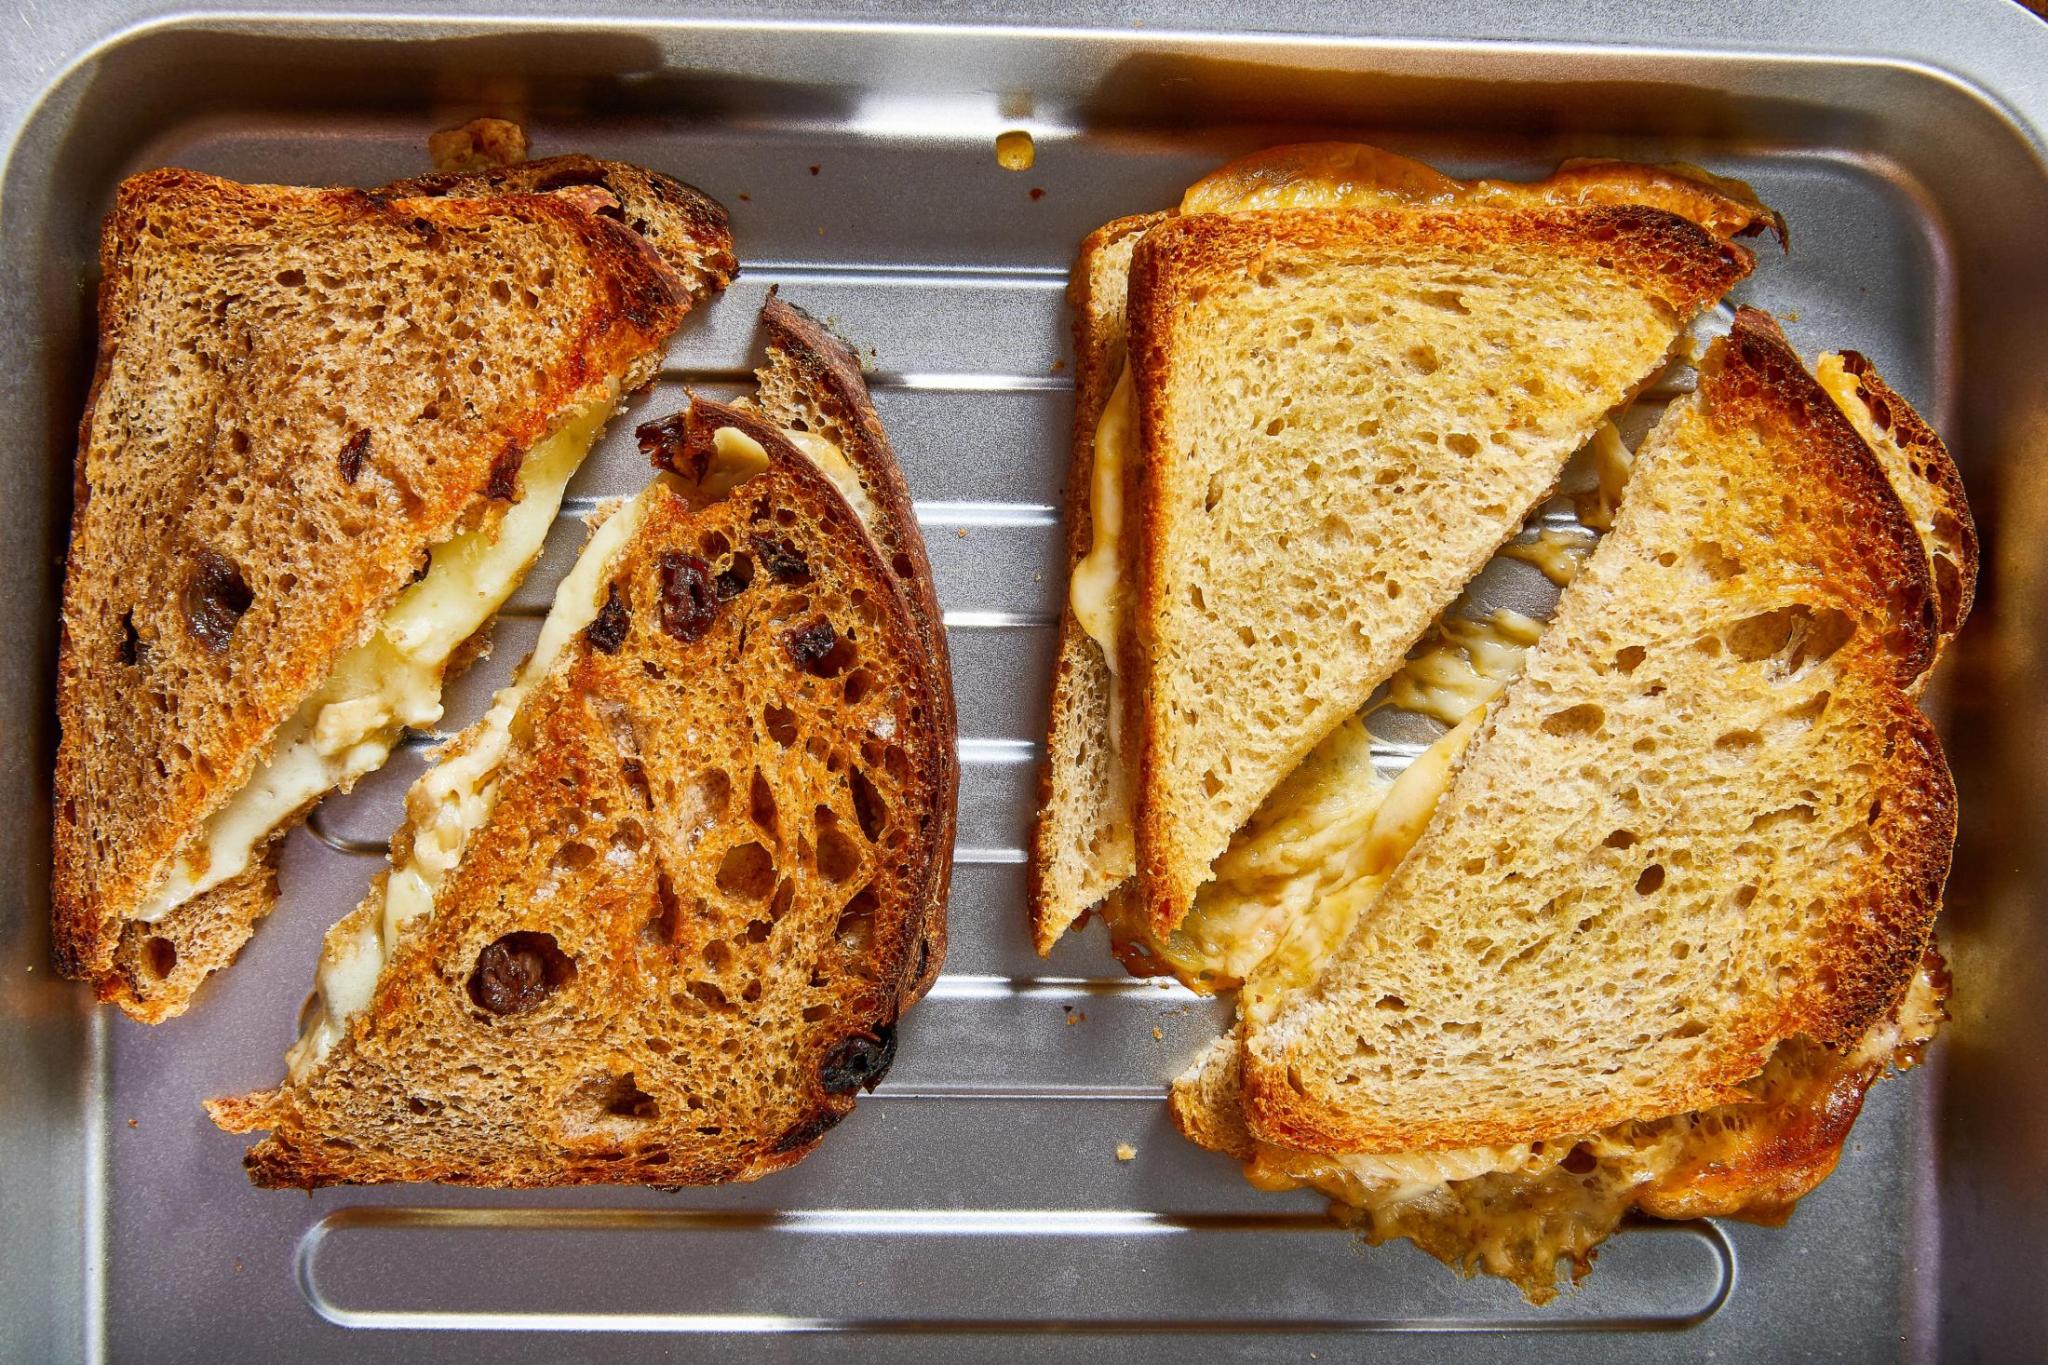 Sourdough Grilled Cheese and Cinnamon Raisin with Brie